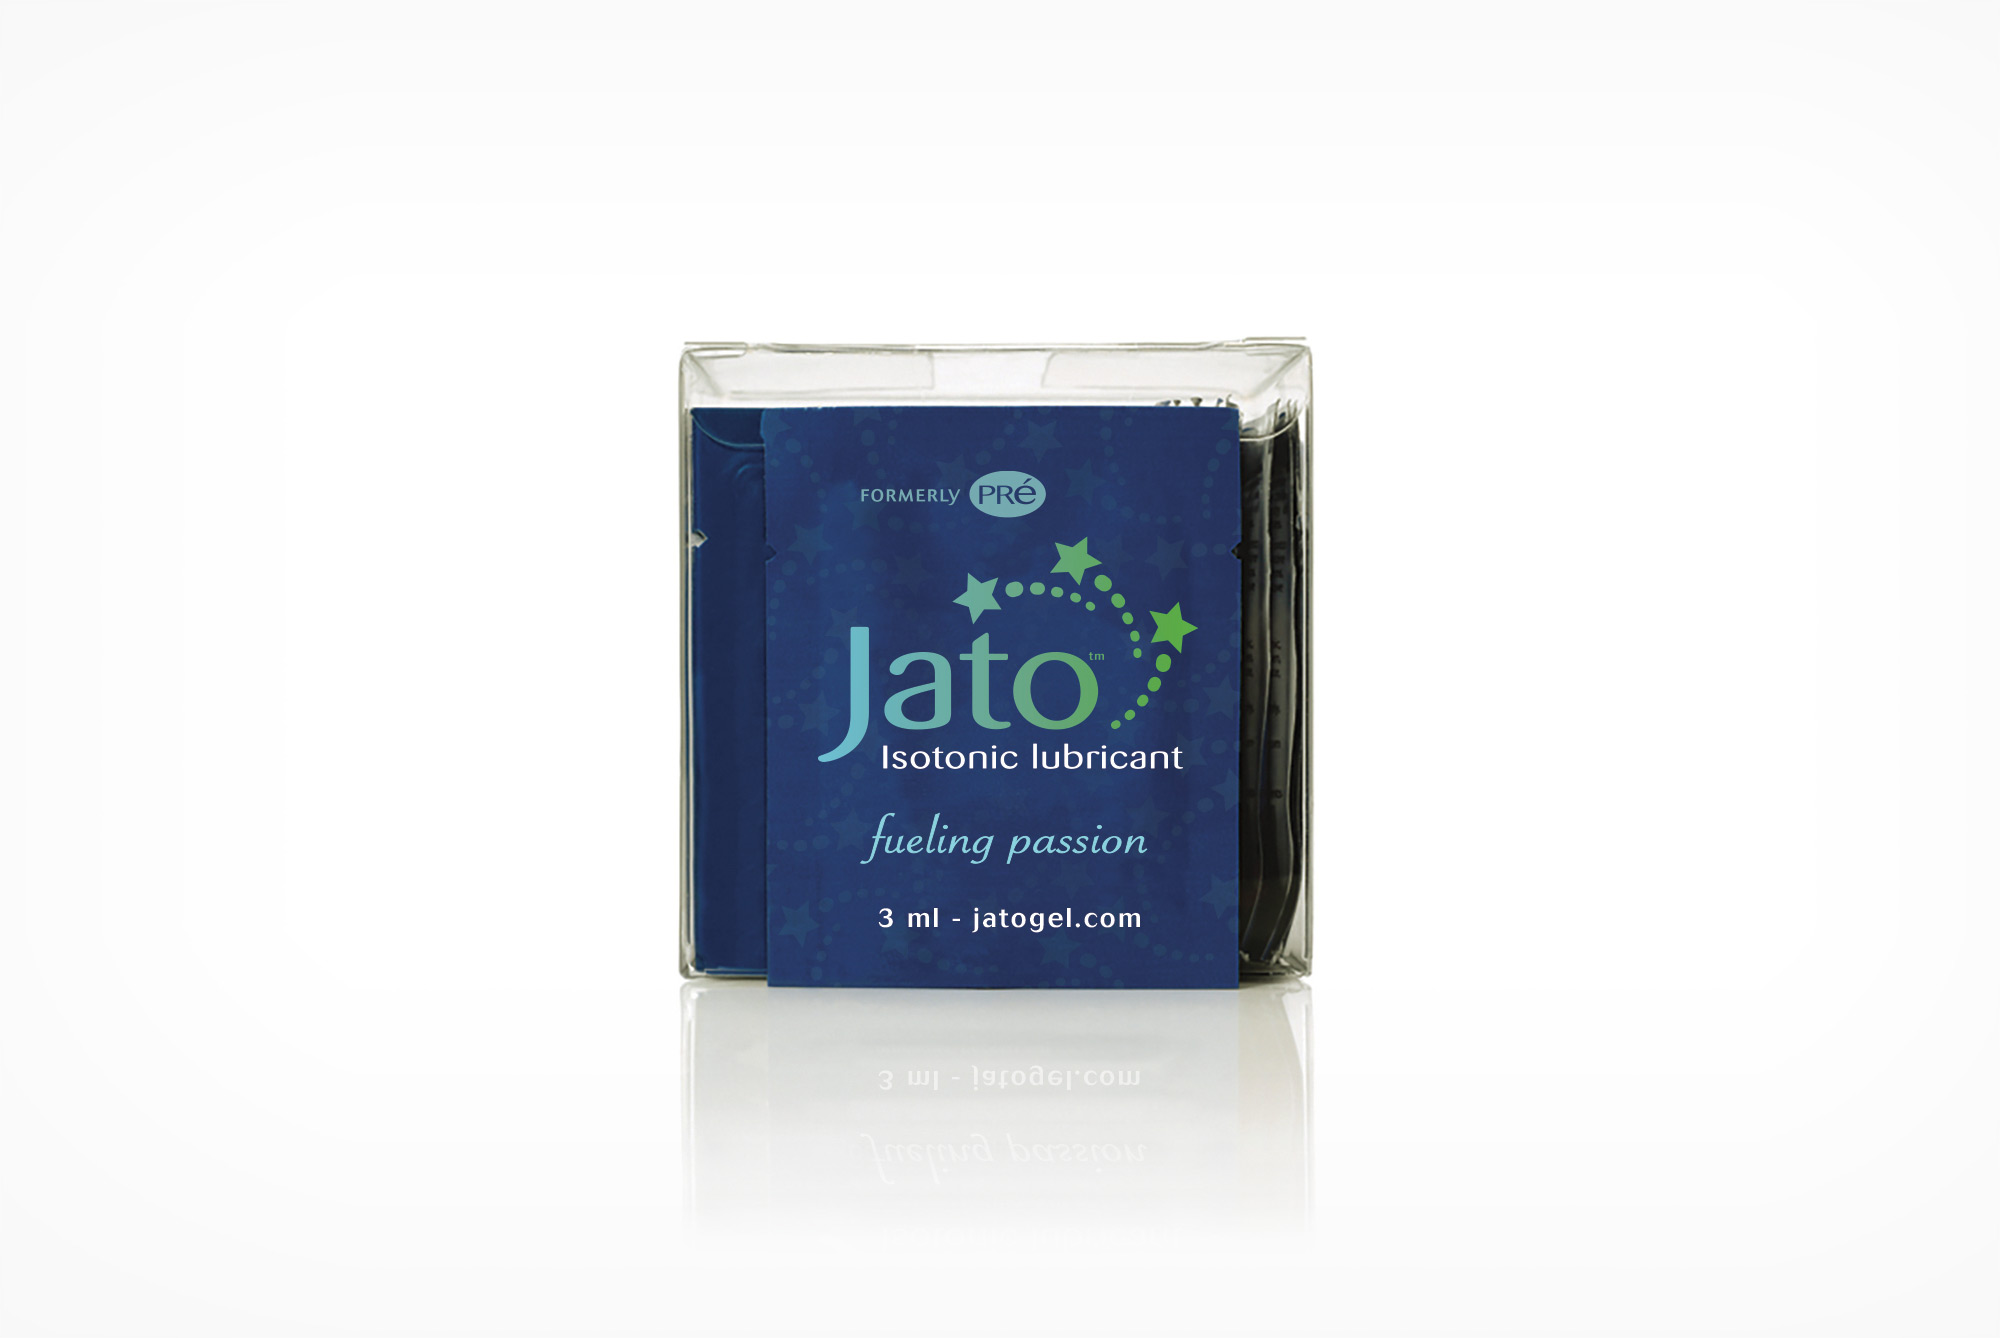 INGfertility's Jet Assisted Take Off - Jato Isotonic Lubricant sachet package design.